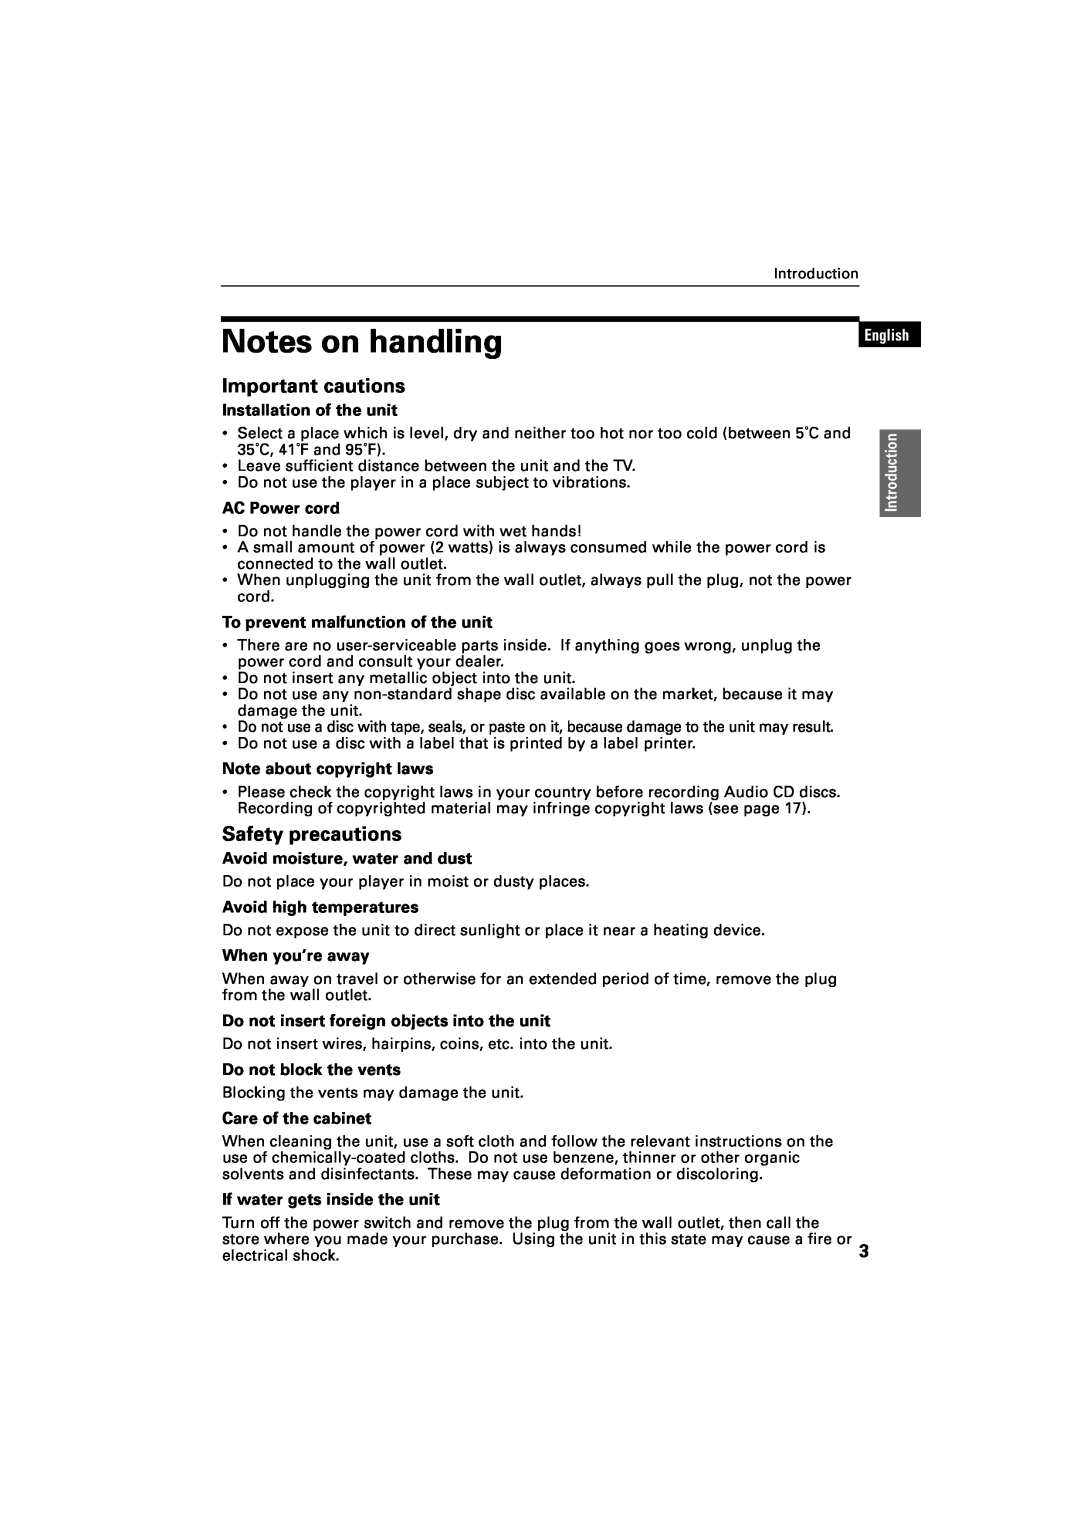 JVC XR-D400SL manual Notes on handling, Important cautions, Safety precautions, English 